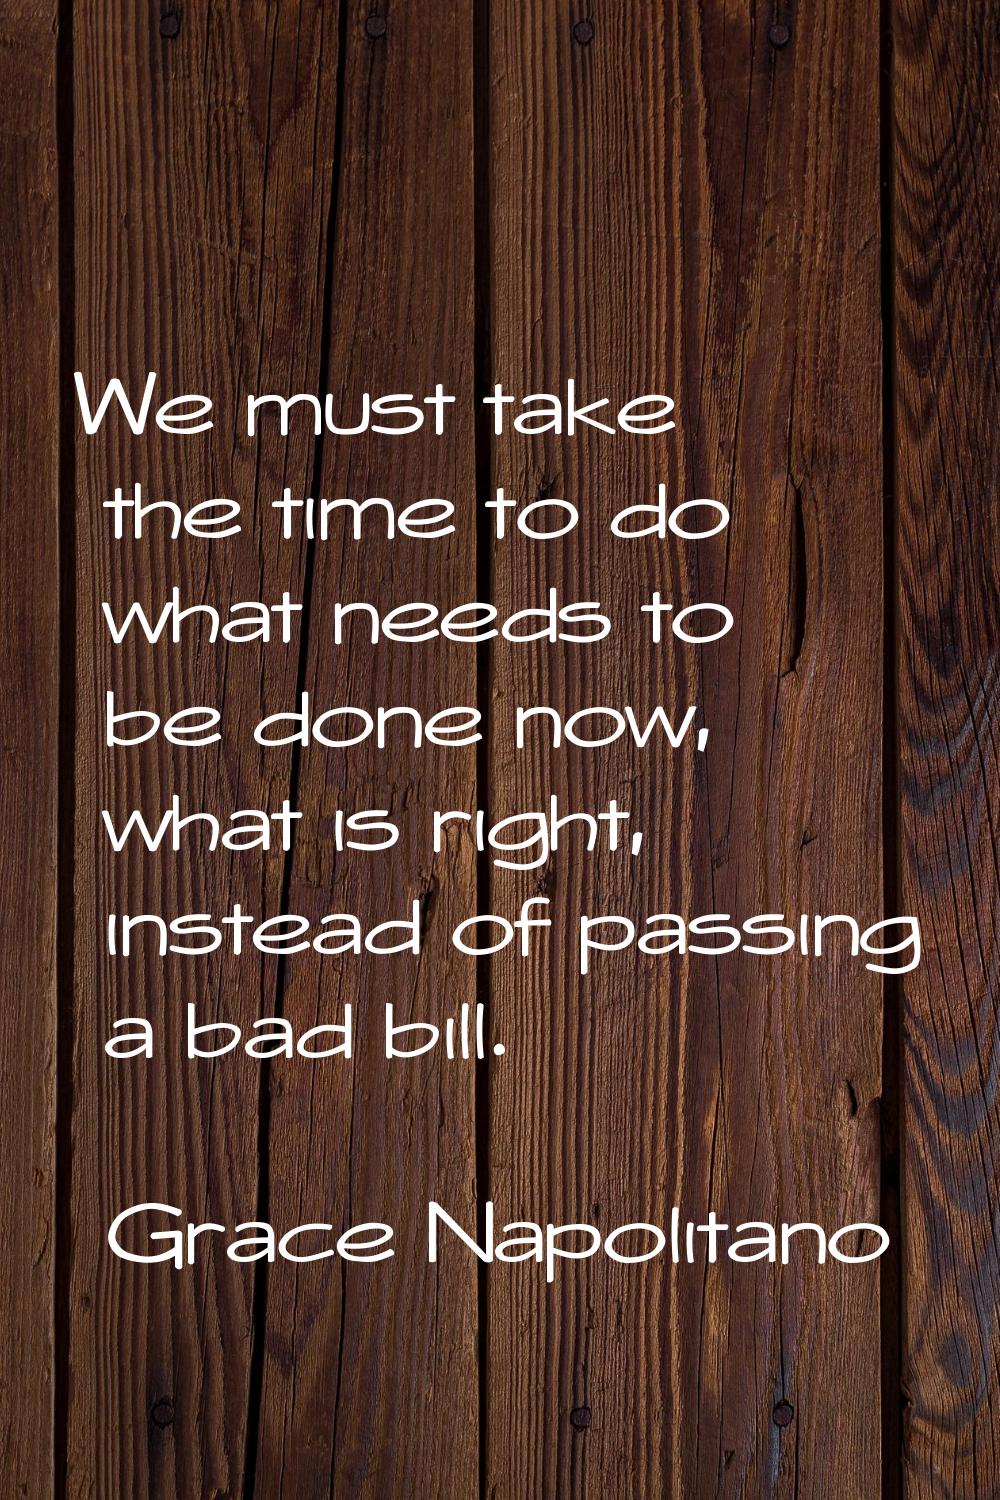 We must take the time to do what needs to be done now, what is right, instead of passing a bad bill